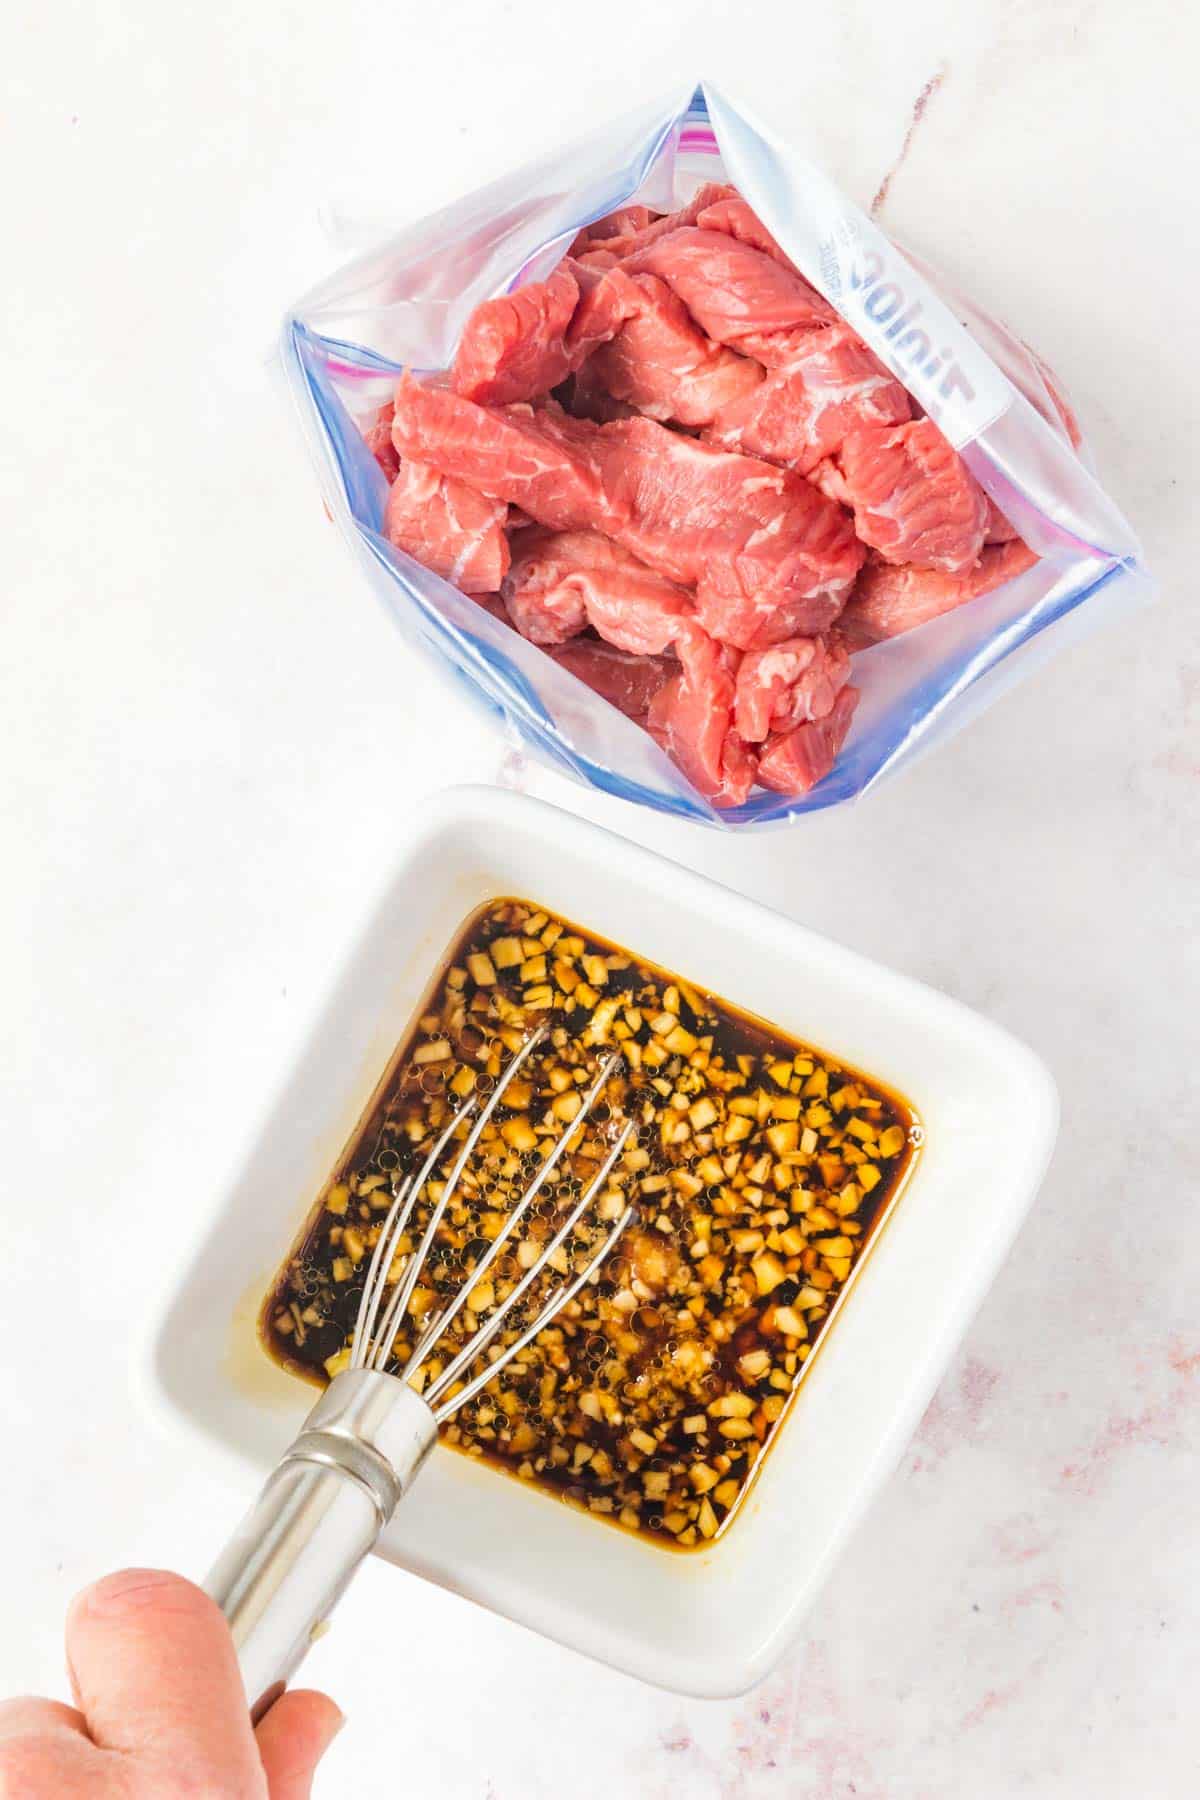 Whisking the marinade in a bowl next to a ziploc bag of sliced beef.